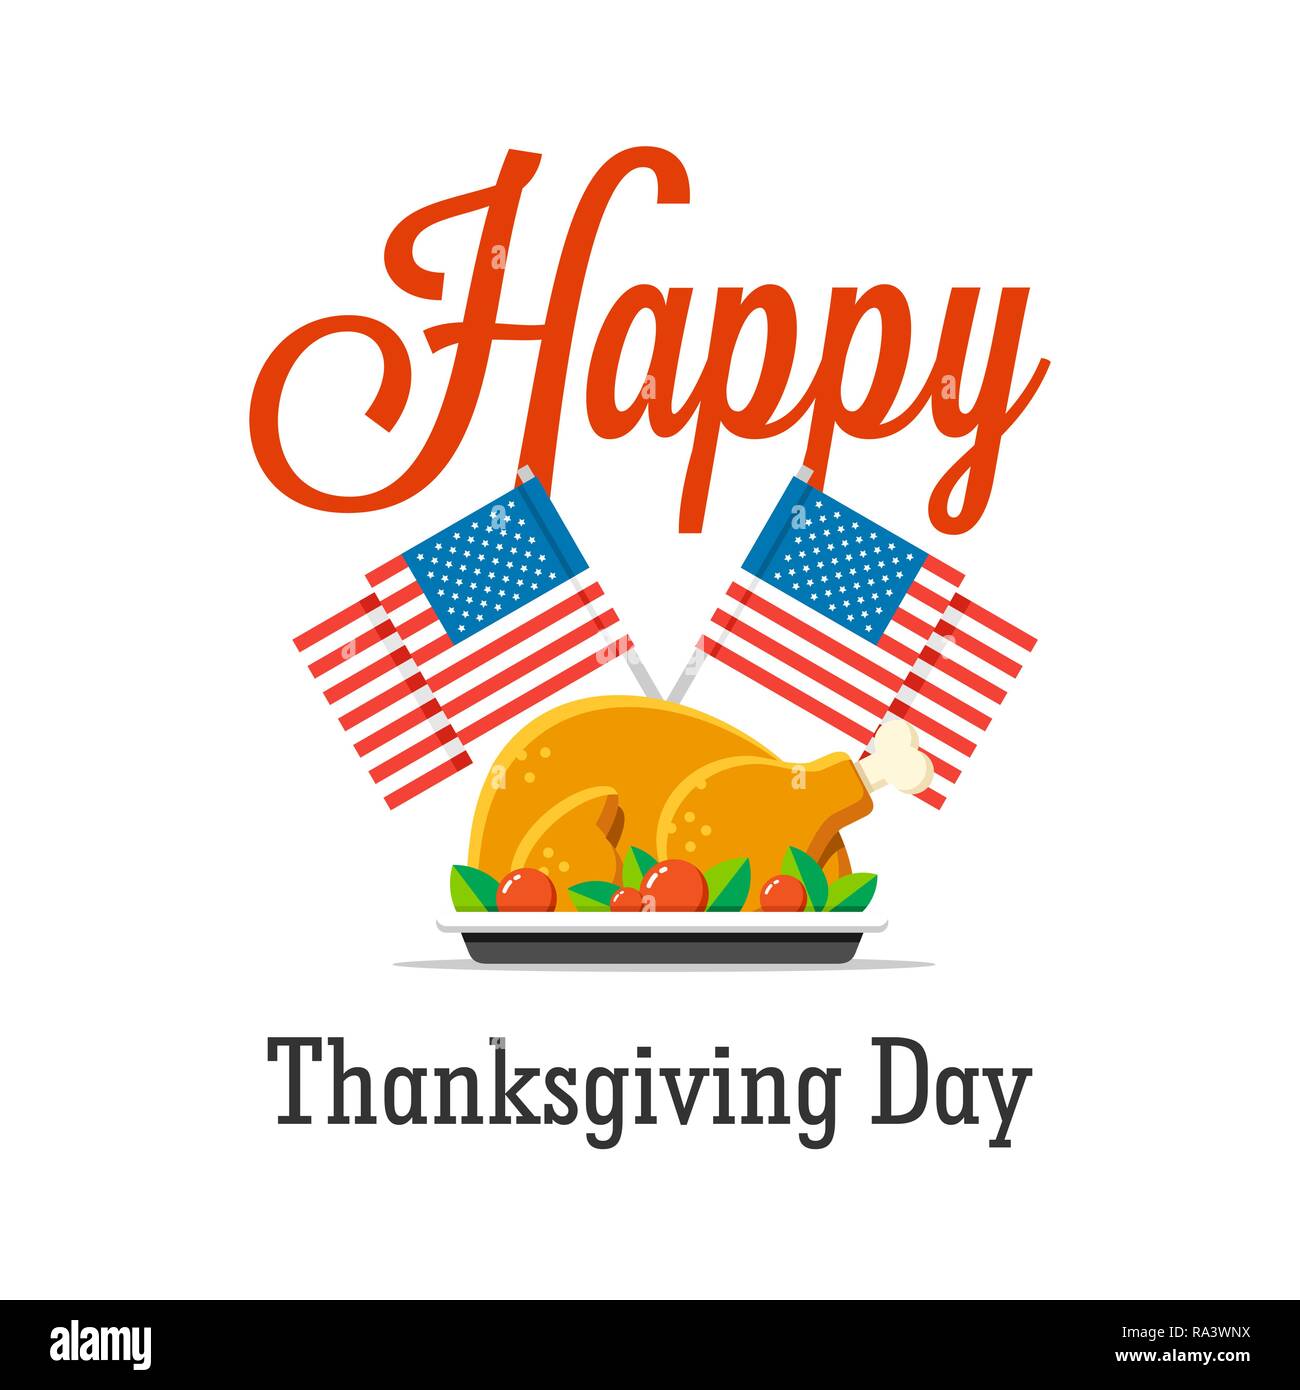 Happy Thanksgiving day vector greeting card with turkey and USA flags. Flat celebration illustration Stock Vector